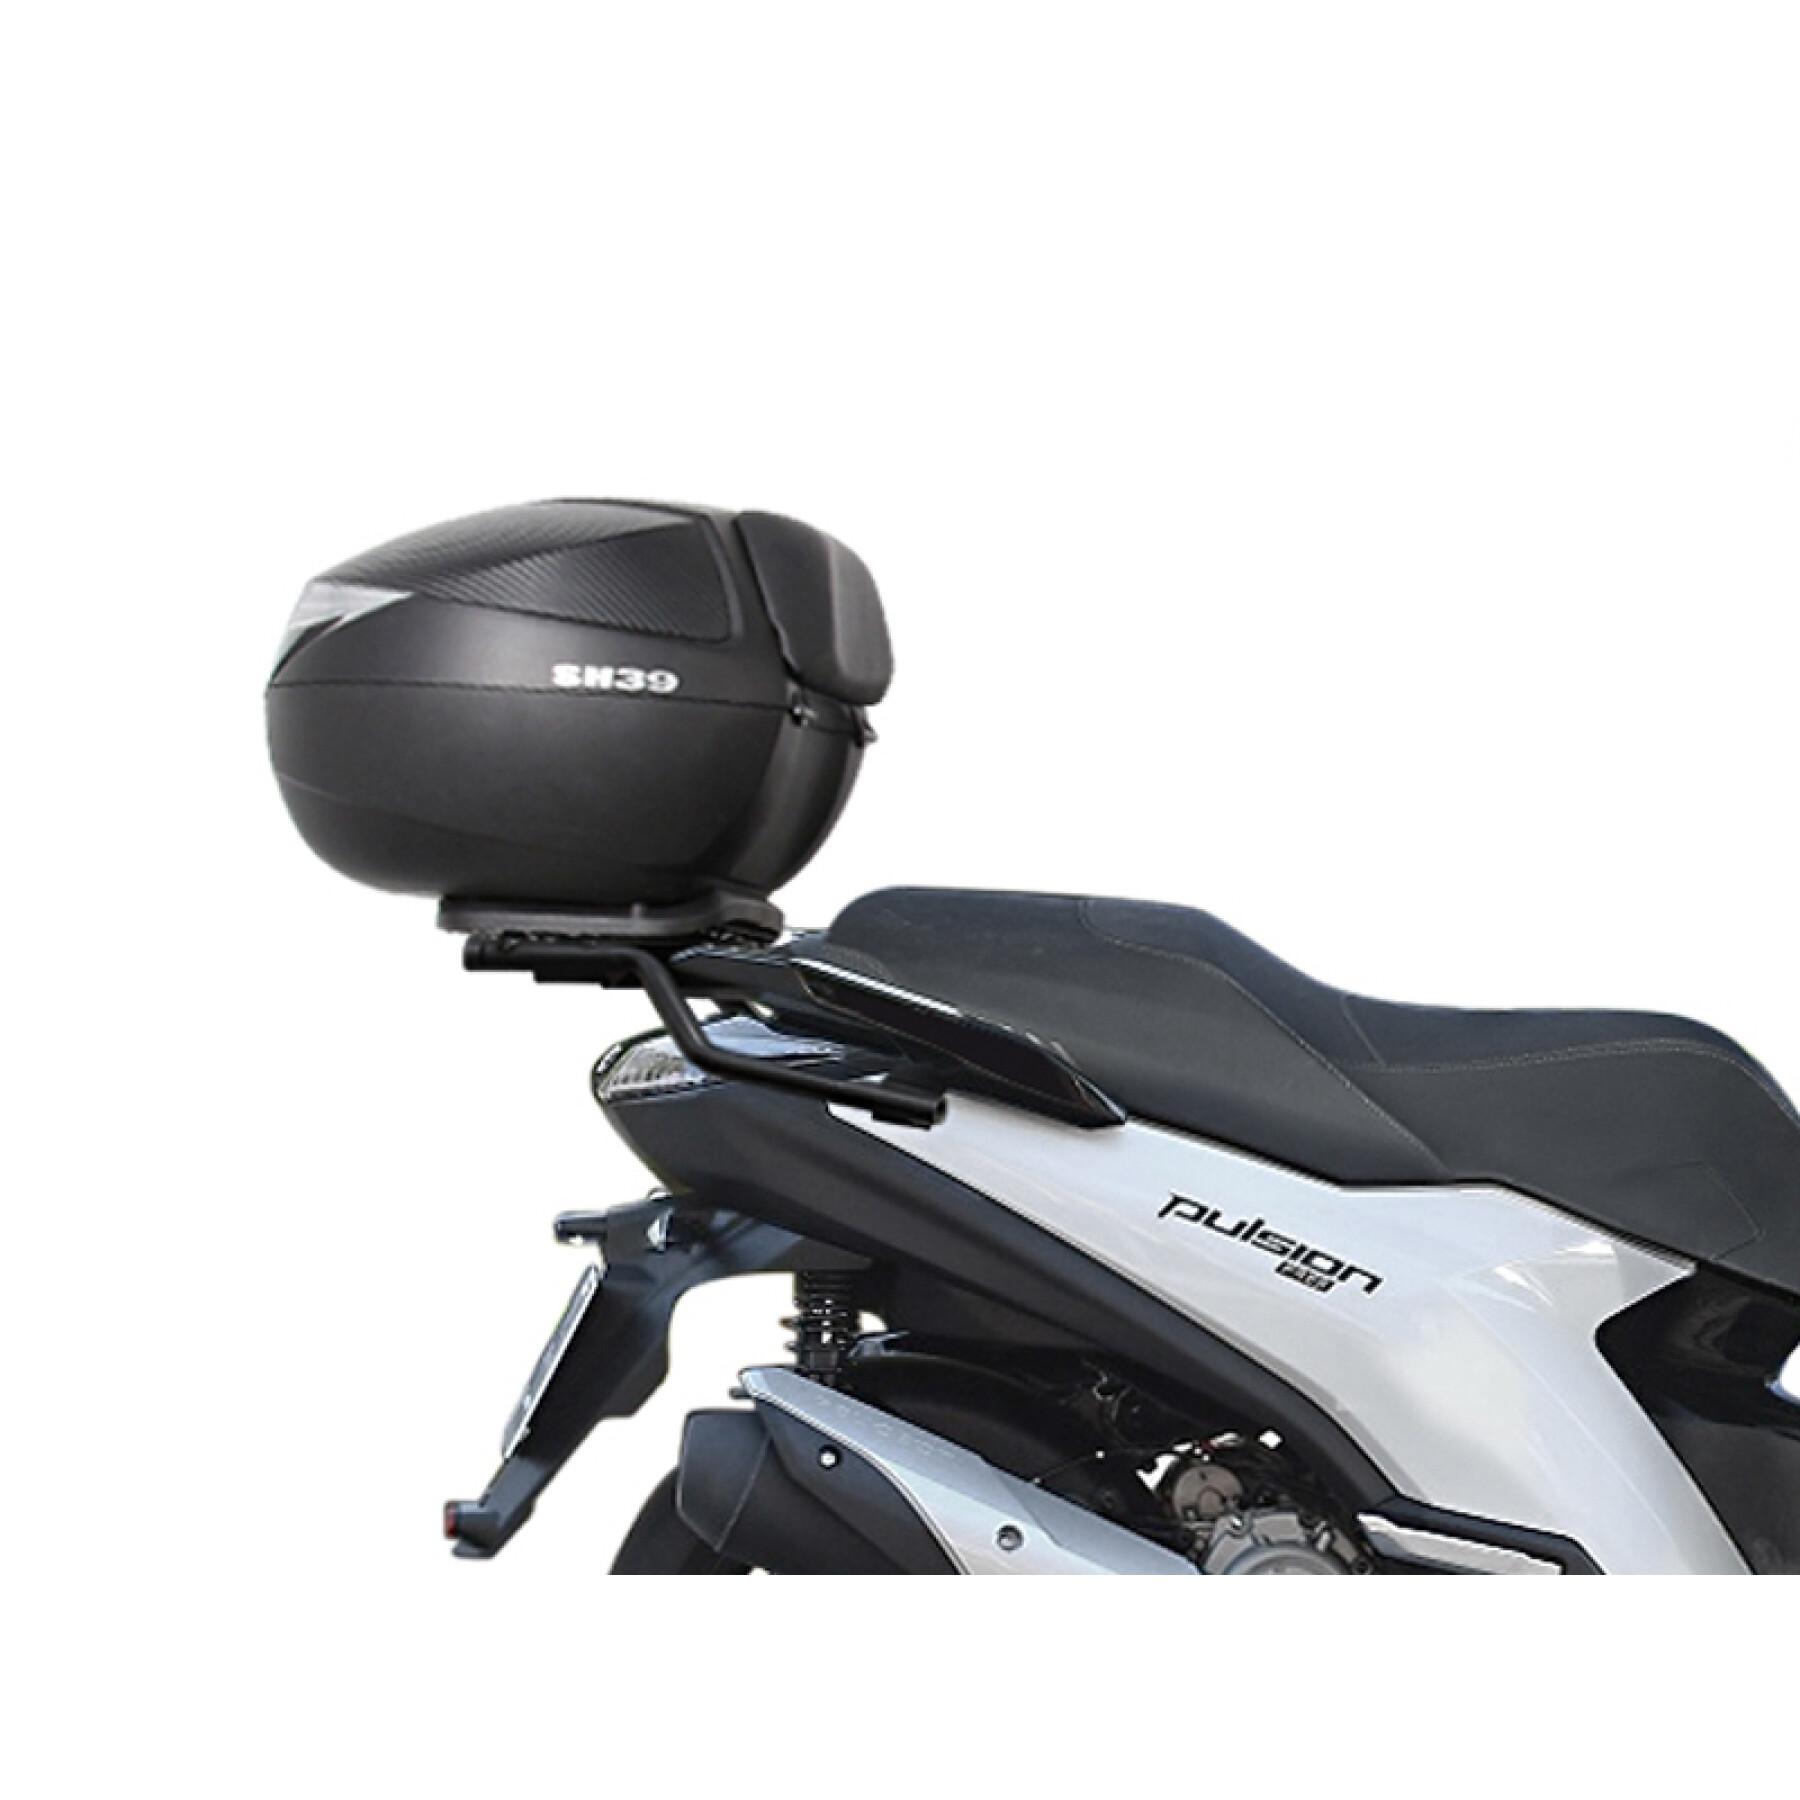 Soporte top case scooter shadpeugeot pulsion 125 2018-2021